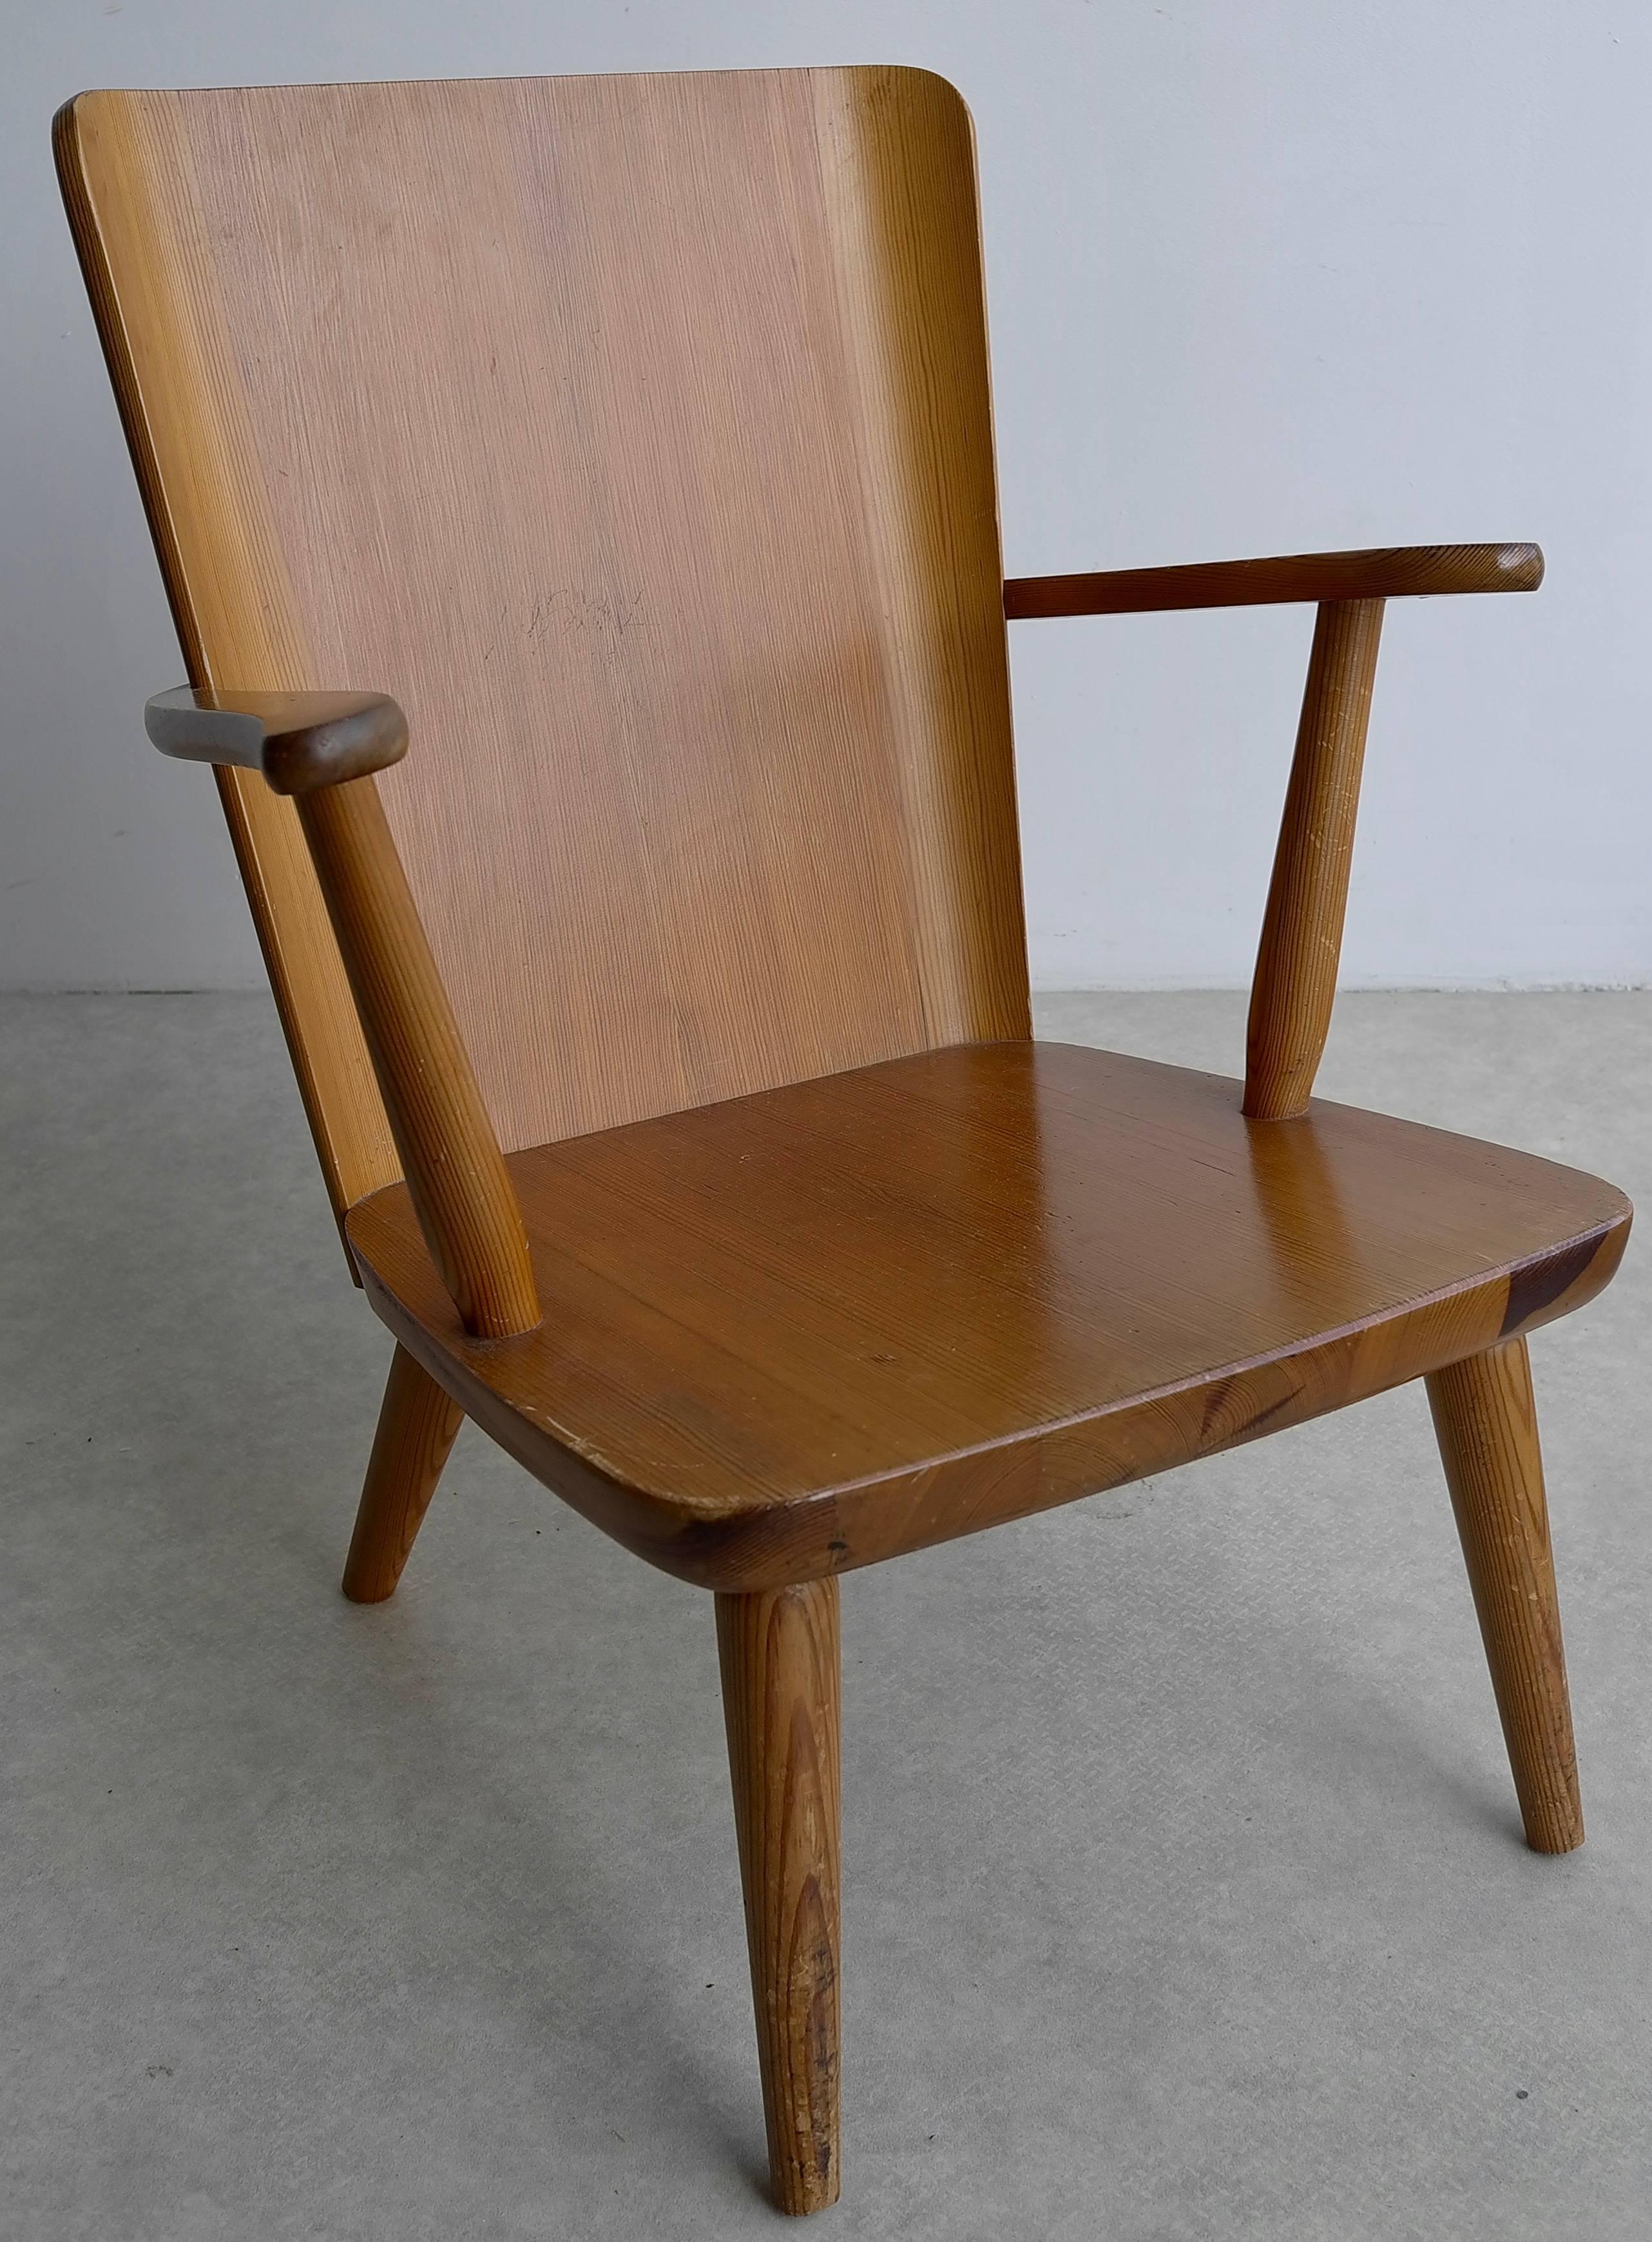 Rare Swedish Armchair in Pine by Goran Malmvall voor Svensk Fur, 1940s In Excellent Condition For Sale In Den Haag, NL